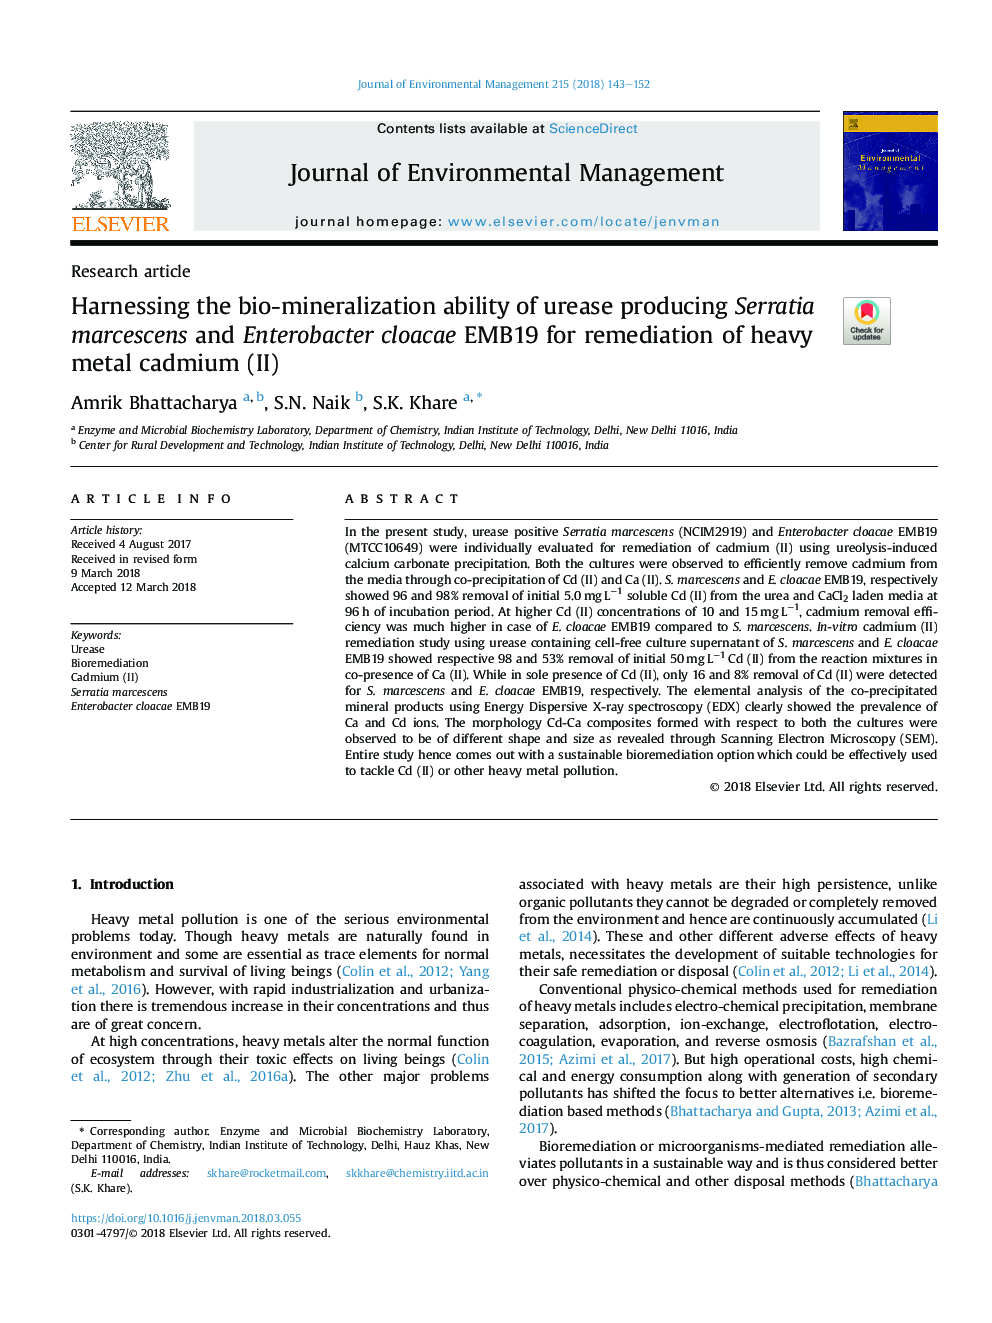 Harnessing the bio-mineralization ability of urease producing Serratia marcescens and Enterobacter cloacae EMB19 for remediation of heavy metal cadmium (II)